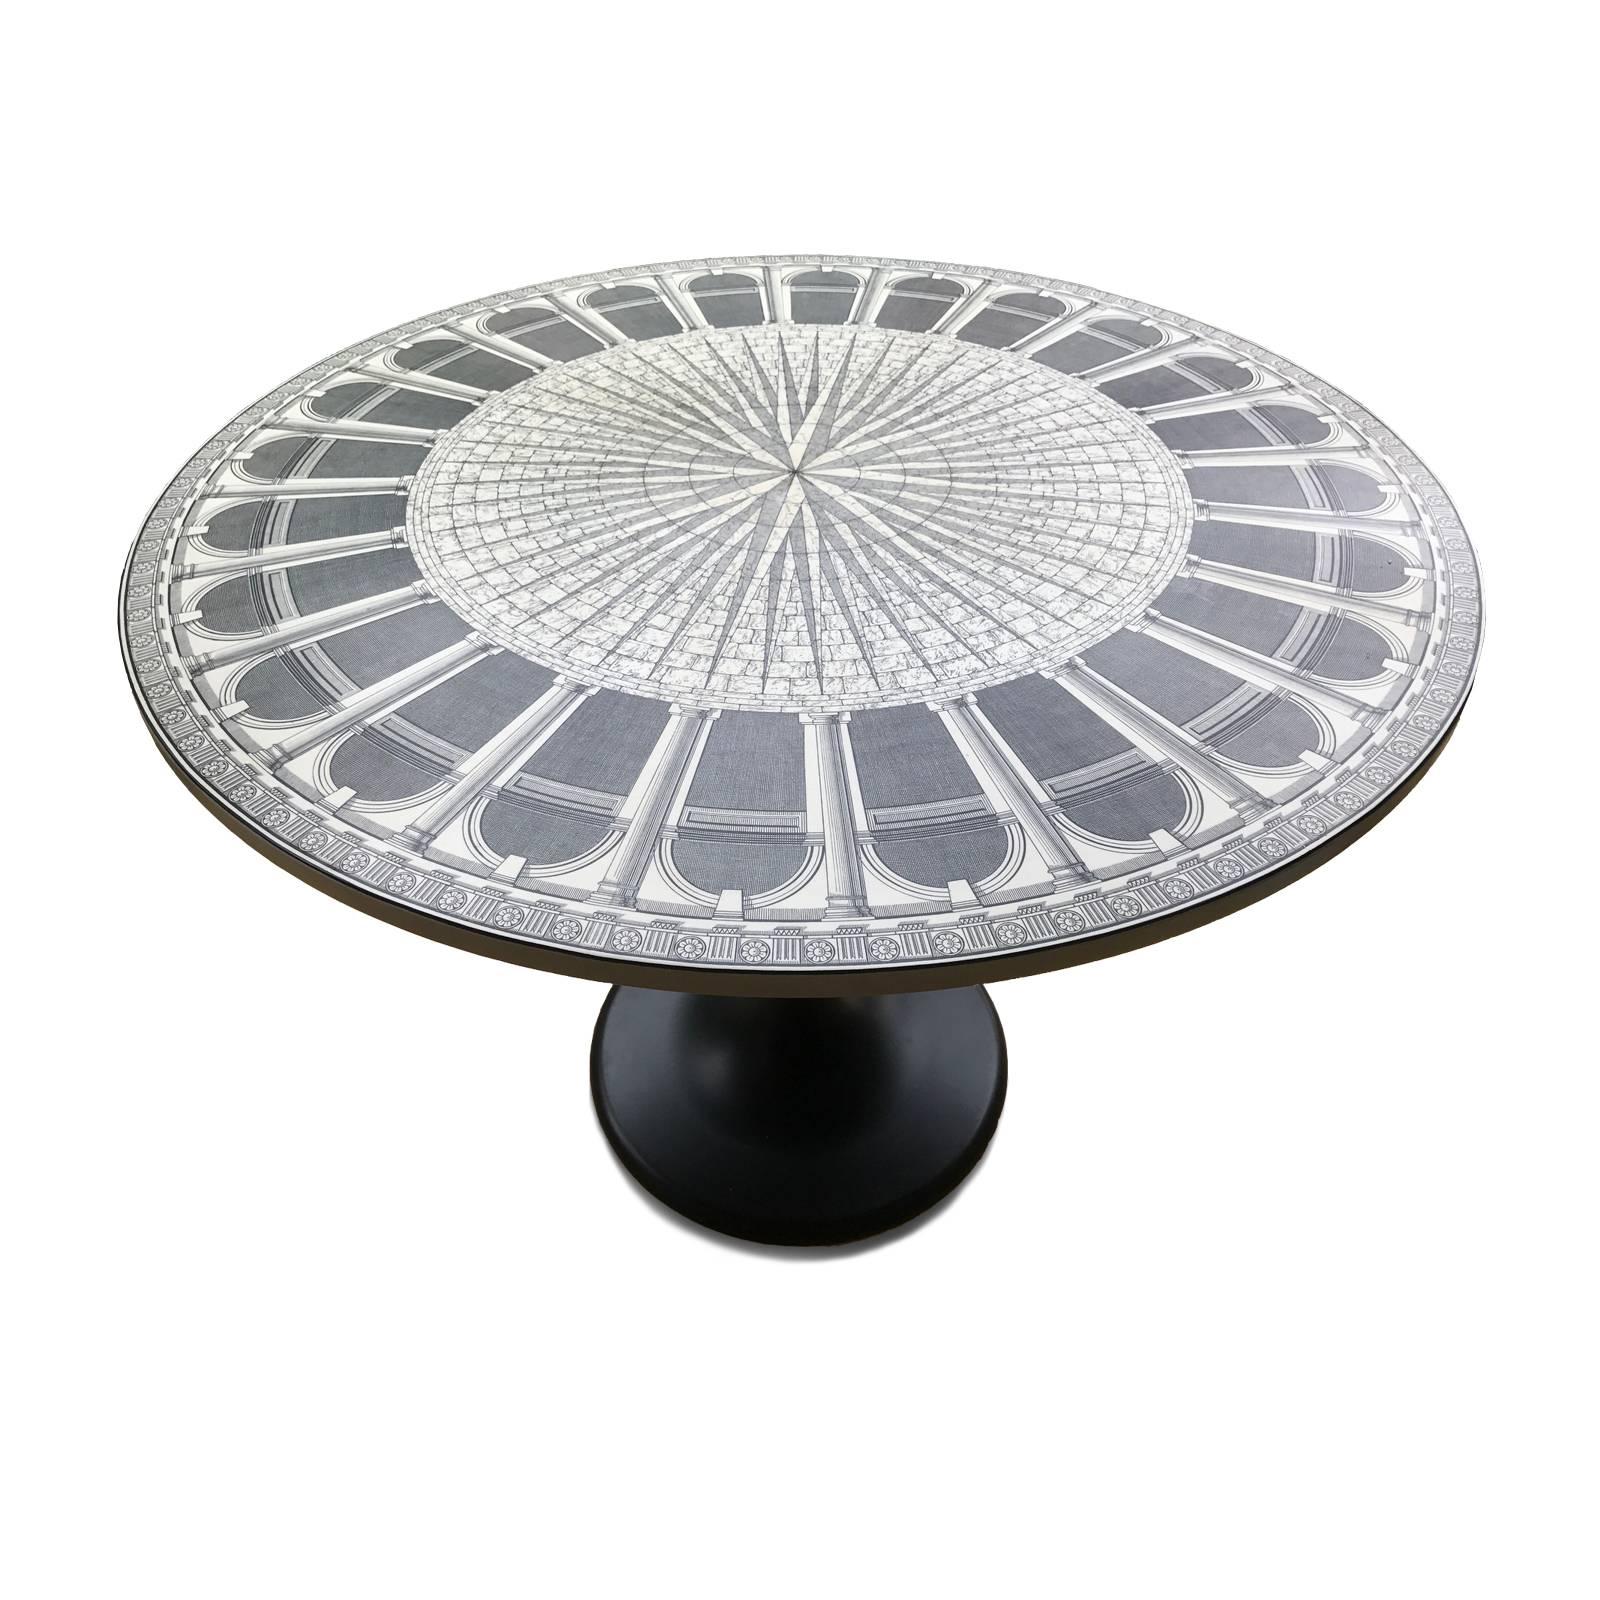 Gorgeous Piero Fornasetti table, signed and limited edition 3 of 4 pieces, 1991. The top is lithographically printed on wood and lacquered on black satin metal base.